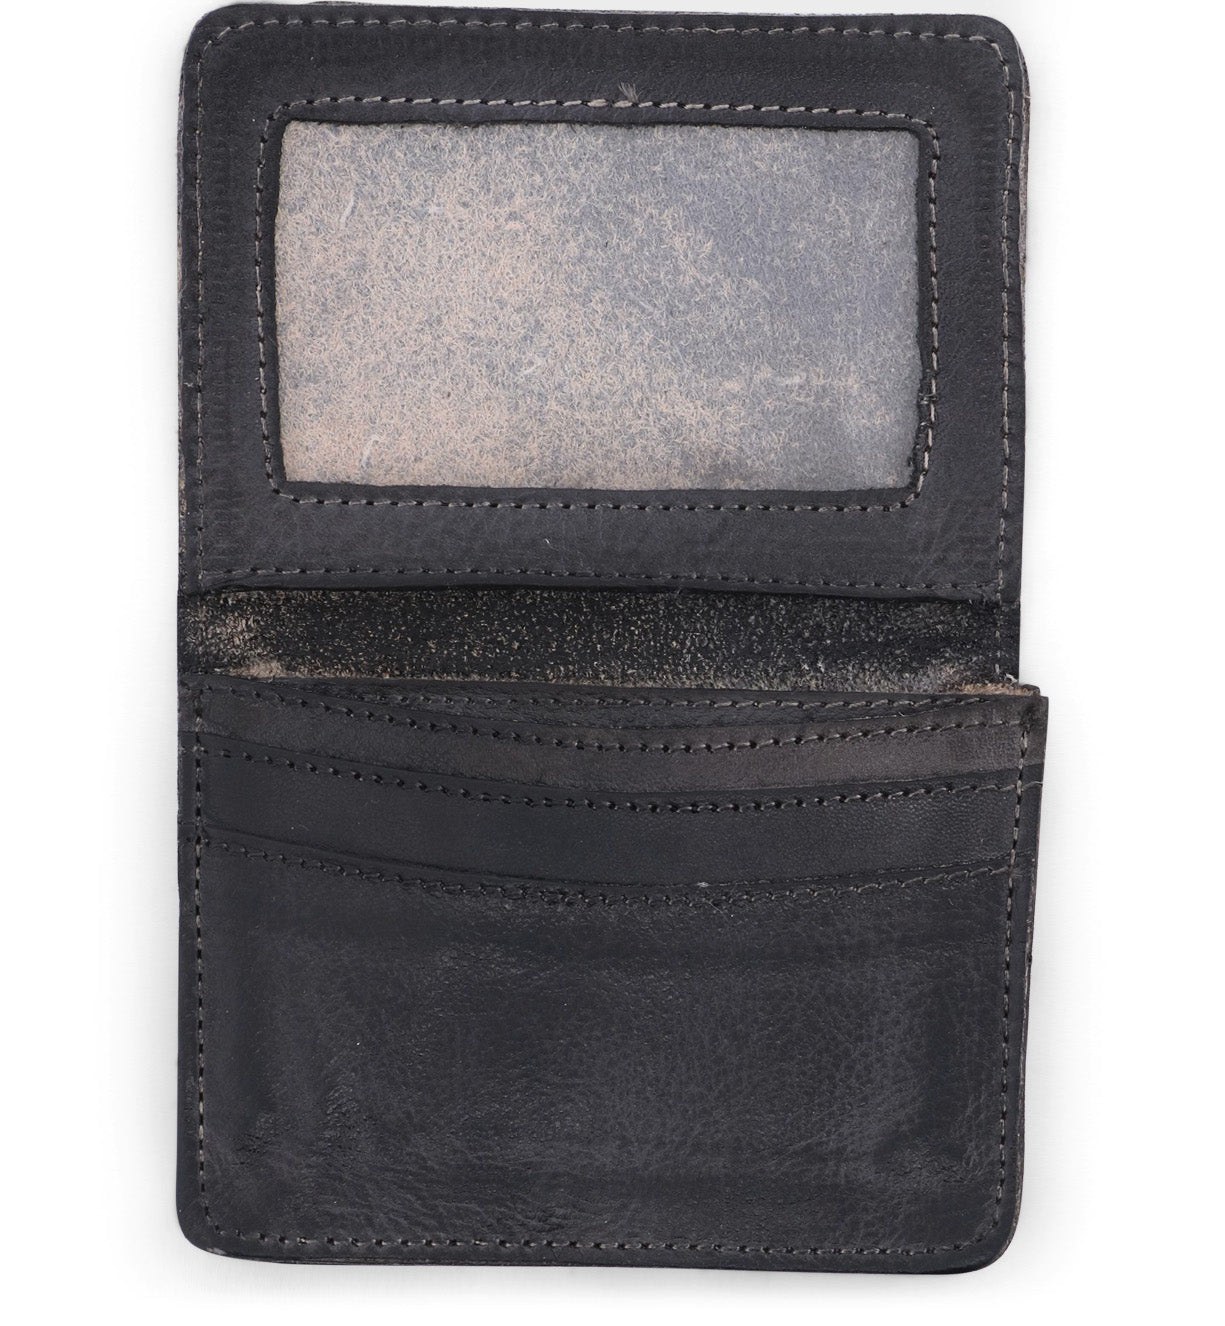 A black leather Jeor wallet with a card holder by Bed Stu.